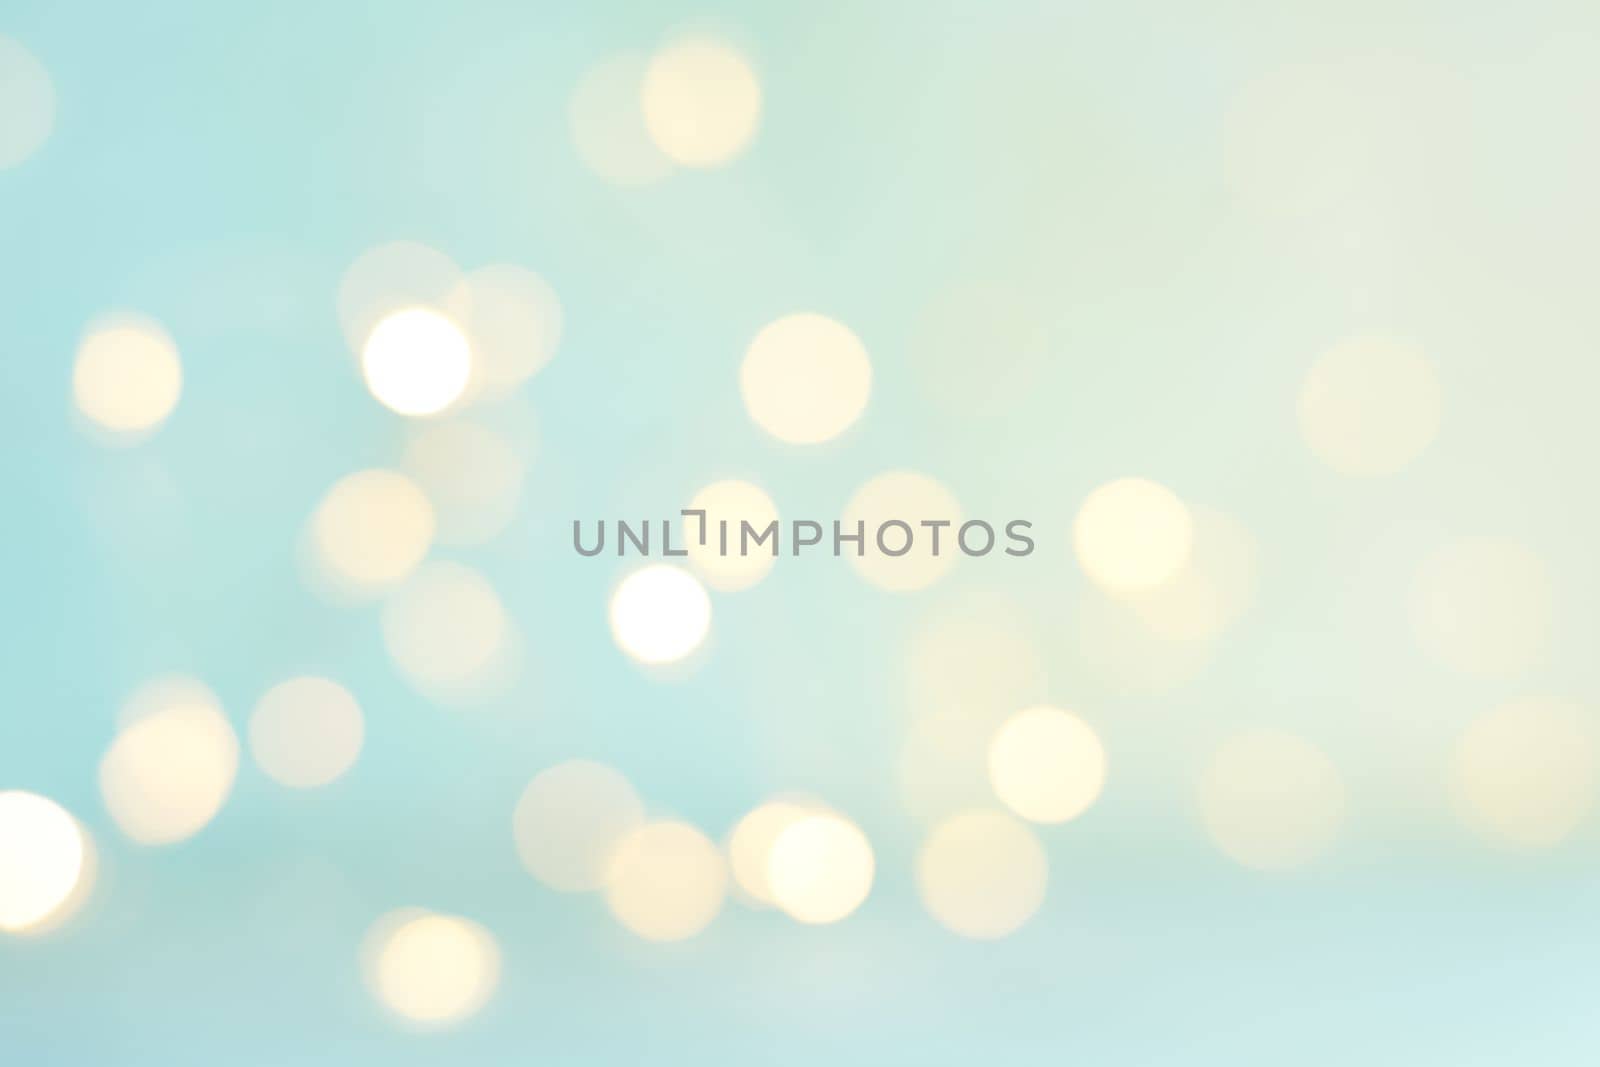 Christmas light background. Holiday glowing backdrop. Defocused Background With Blinking light. Blurred Bokeh. High quality photo